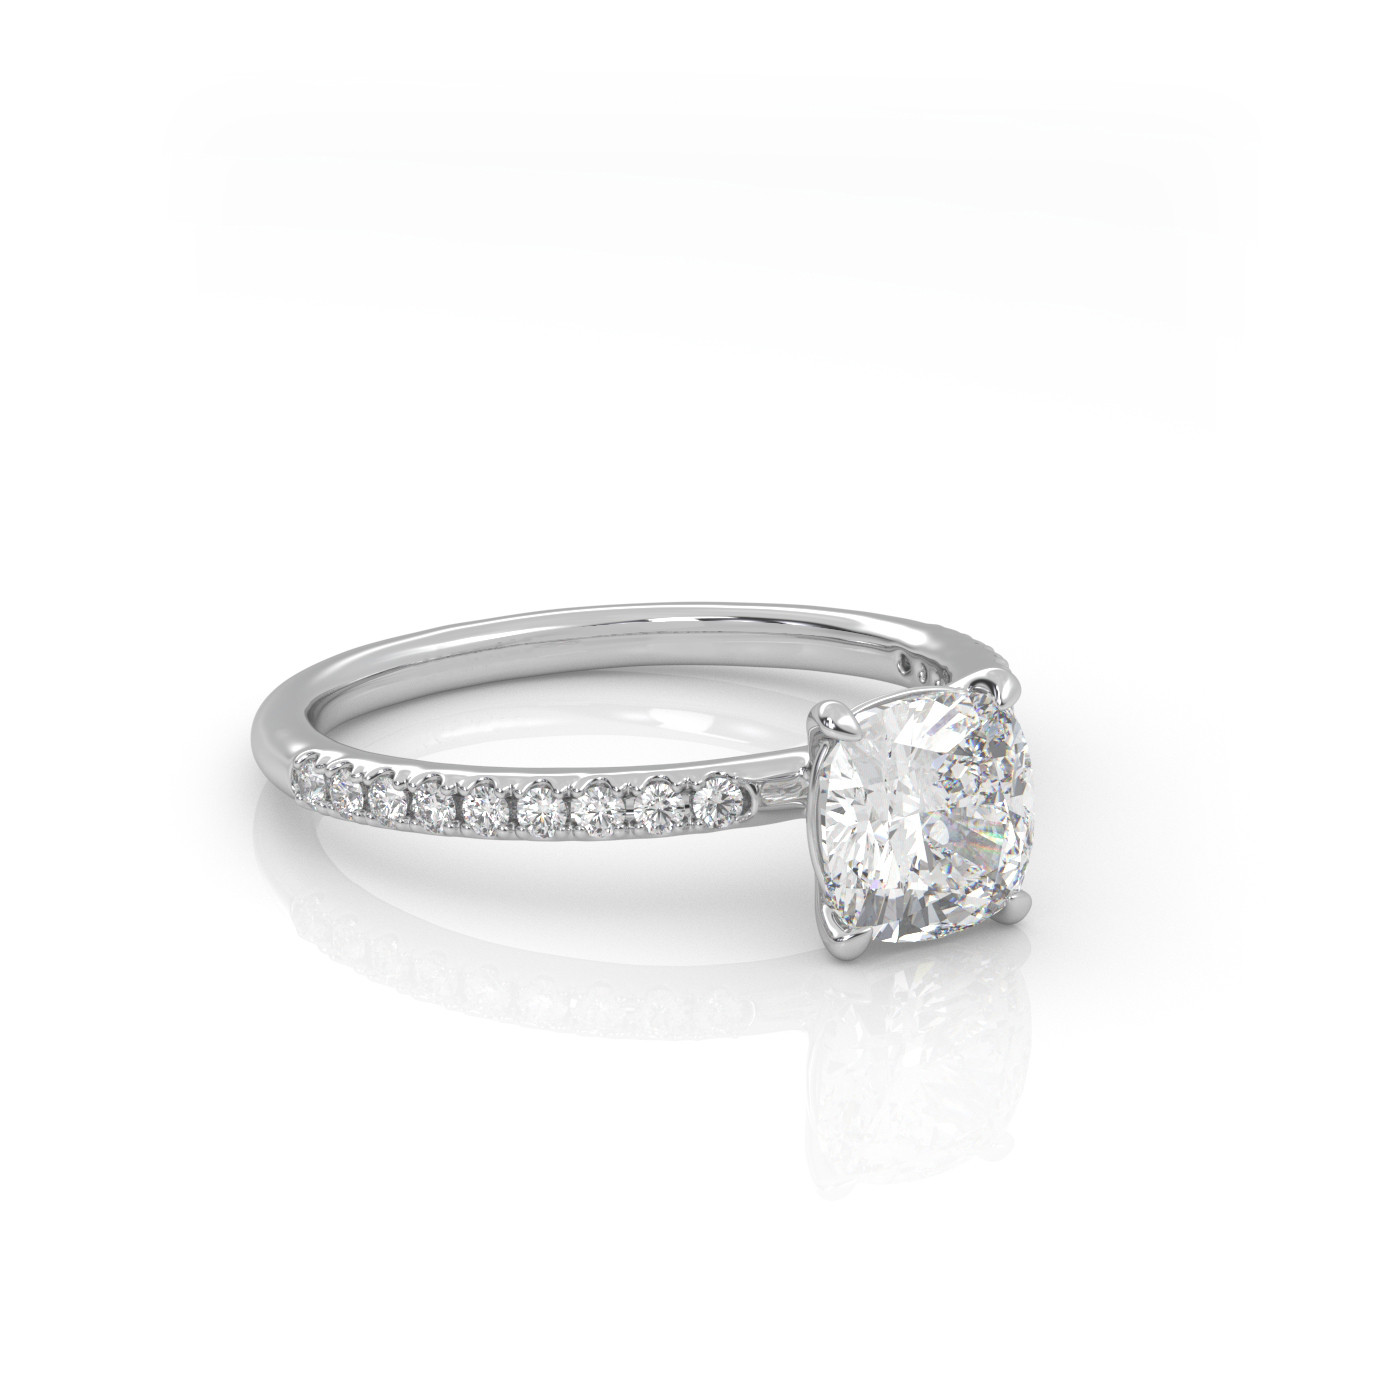 18K WHITE GOLD Cushion Cut Solitaire Engagement Ring with Pave Band